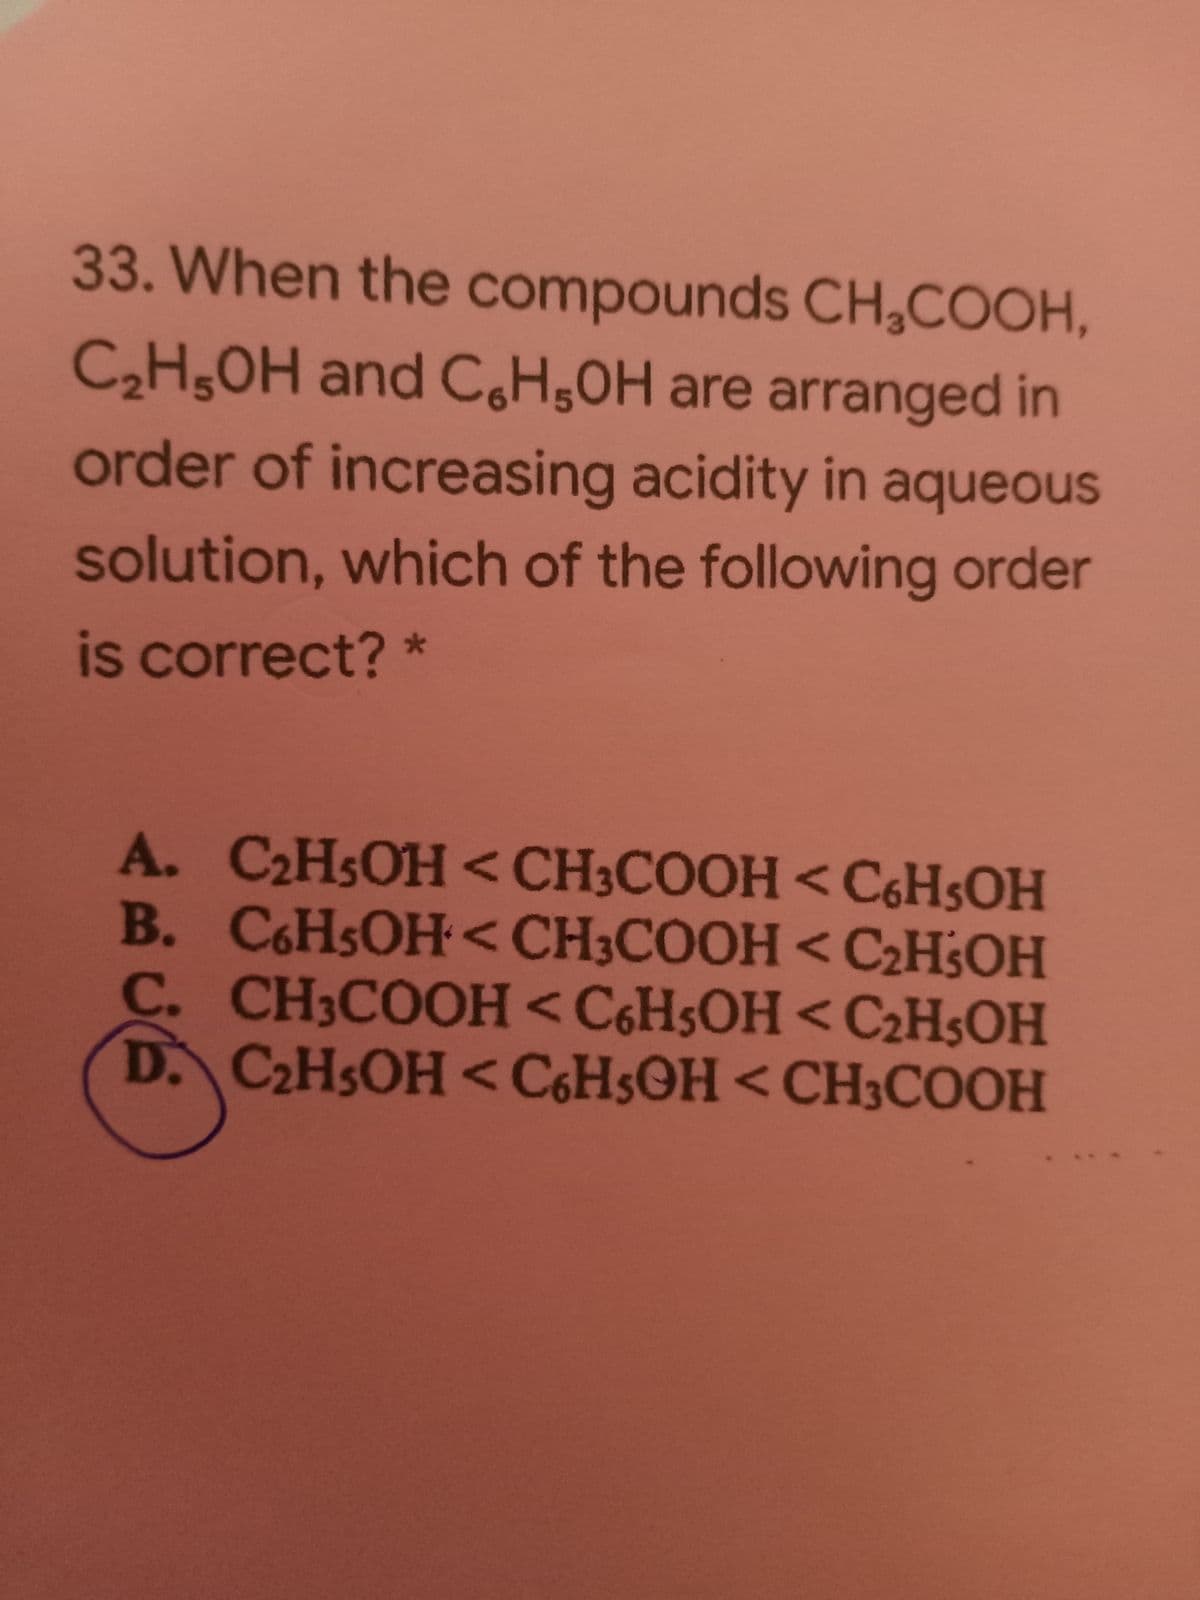 33. When the compounds CH,COOH,
C,H,OH and C,H;OH are arranged in
order of increasing acidity in aqueous
solution, which of the following order
is correct? *
A. C2H5OH <CH3COOH < C6H5OH
B. CHSOH<CH3COOH<C2H3OH
C. CH3COOH <C6HSOH <C2H$OH
D. C2HSOH <C6H5©H<CH3COOH
